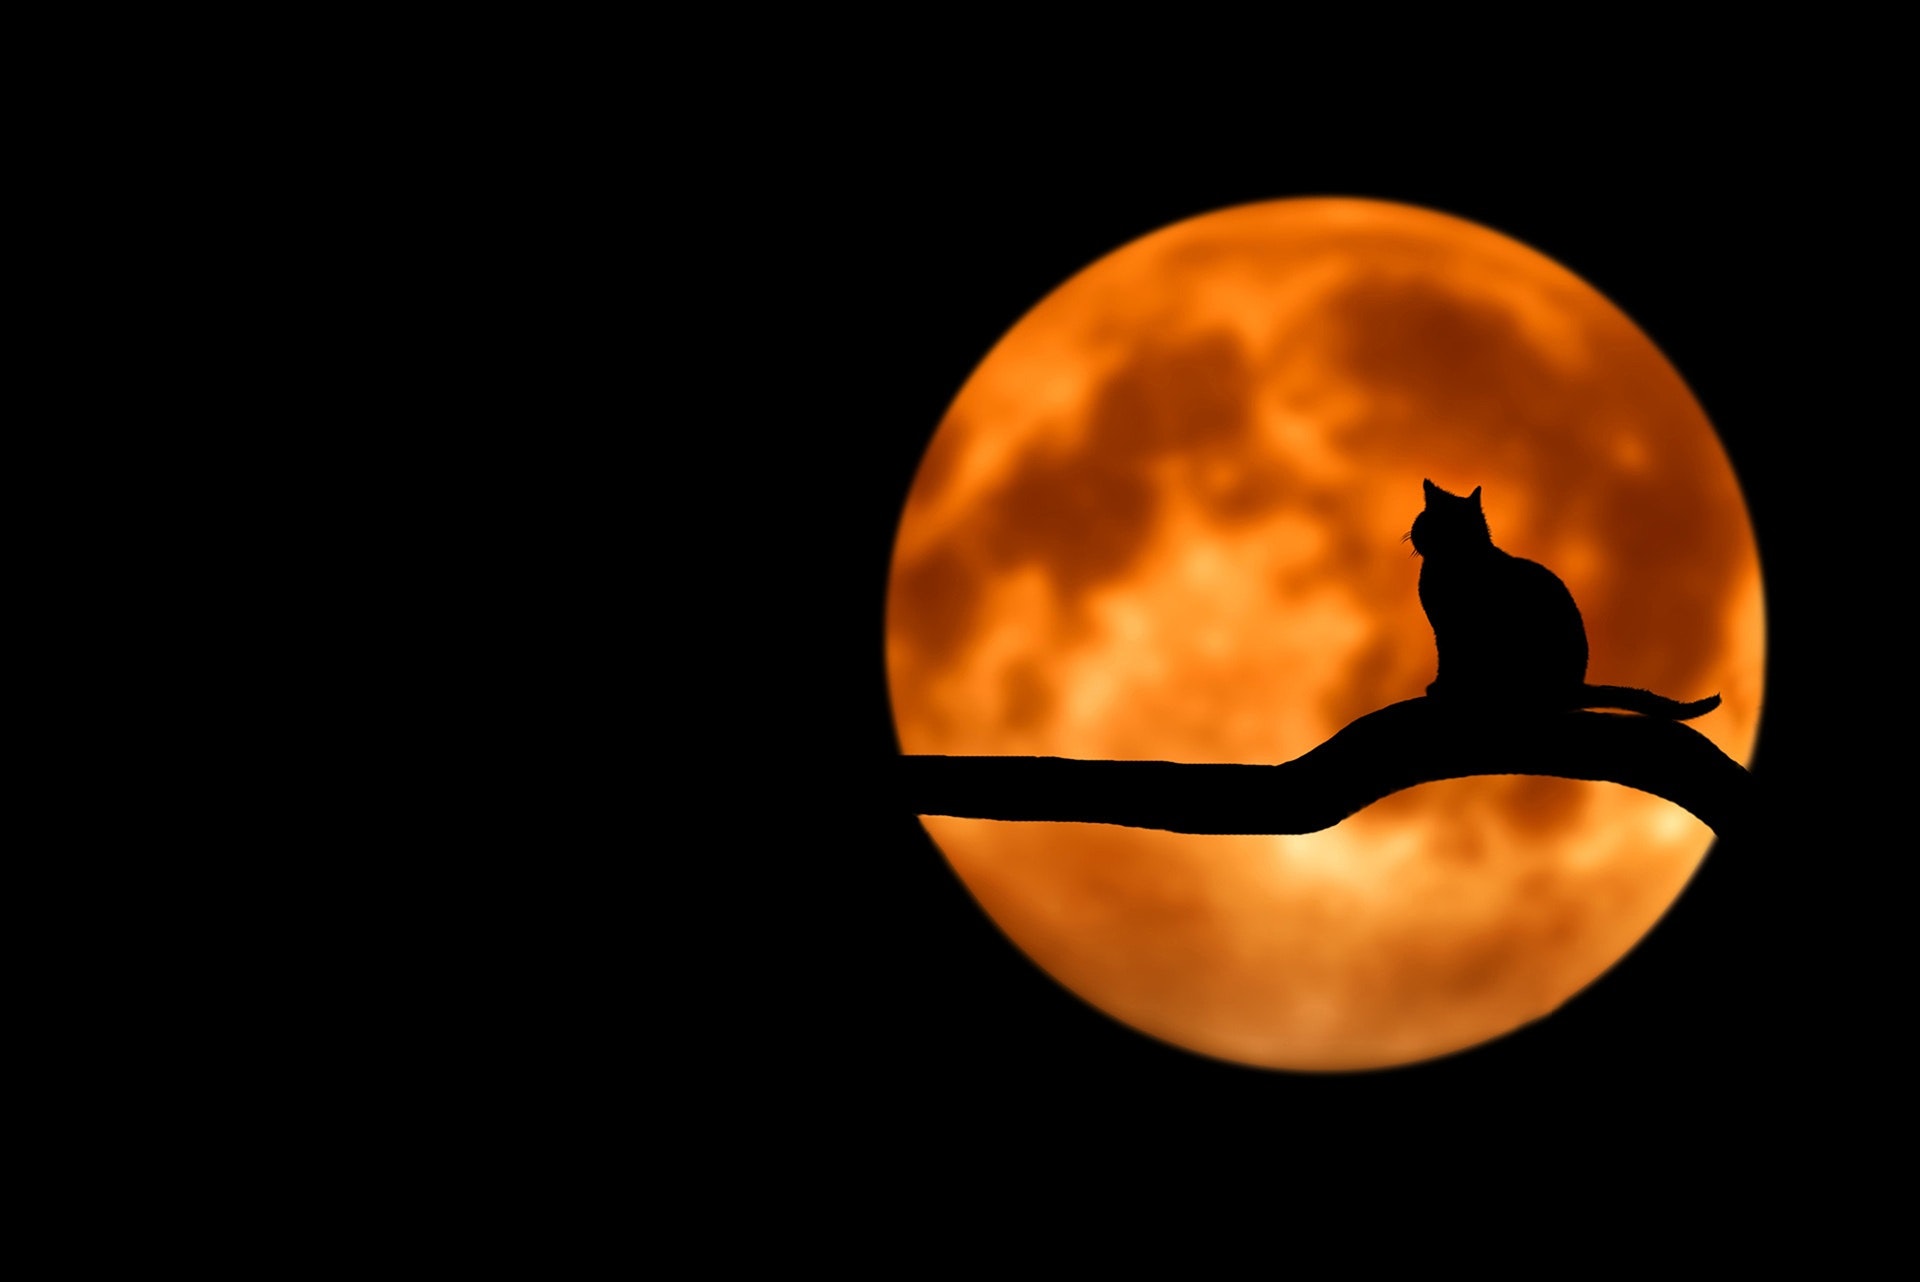 Halloween cat against moon Keep This Halloween Fun for You and Your Pets - American Humane